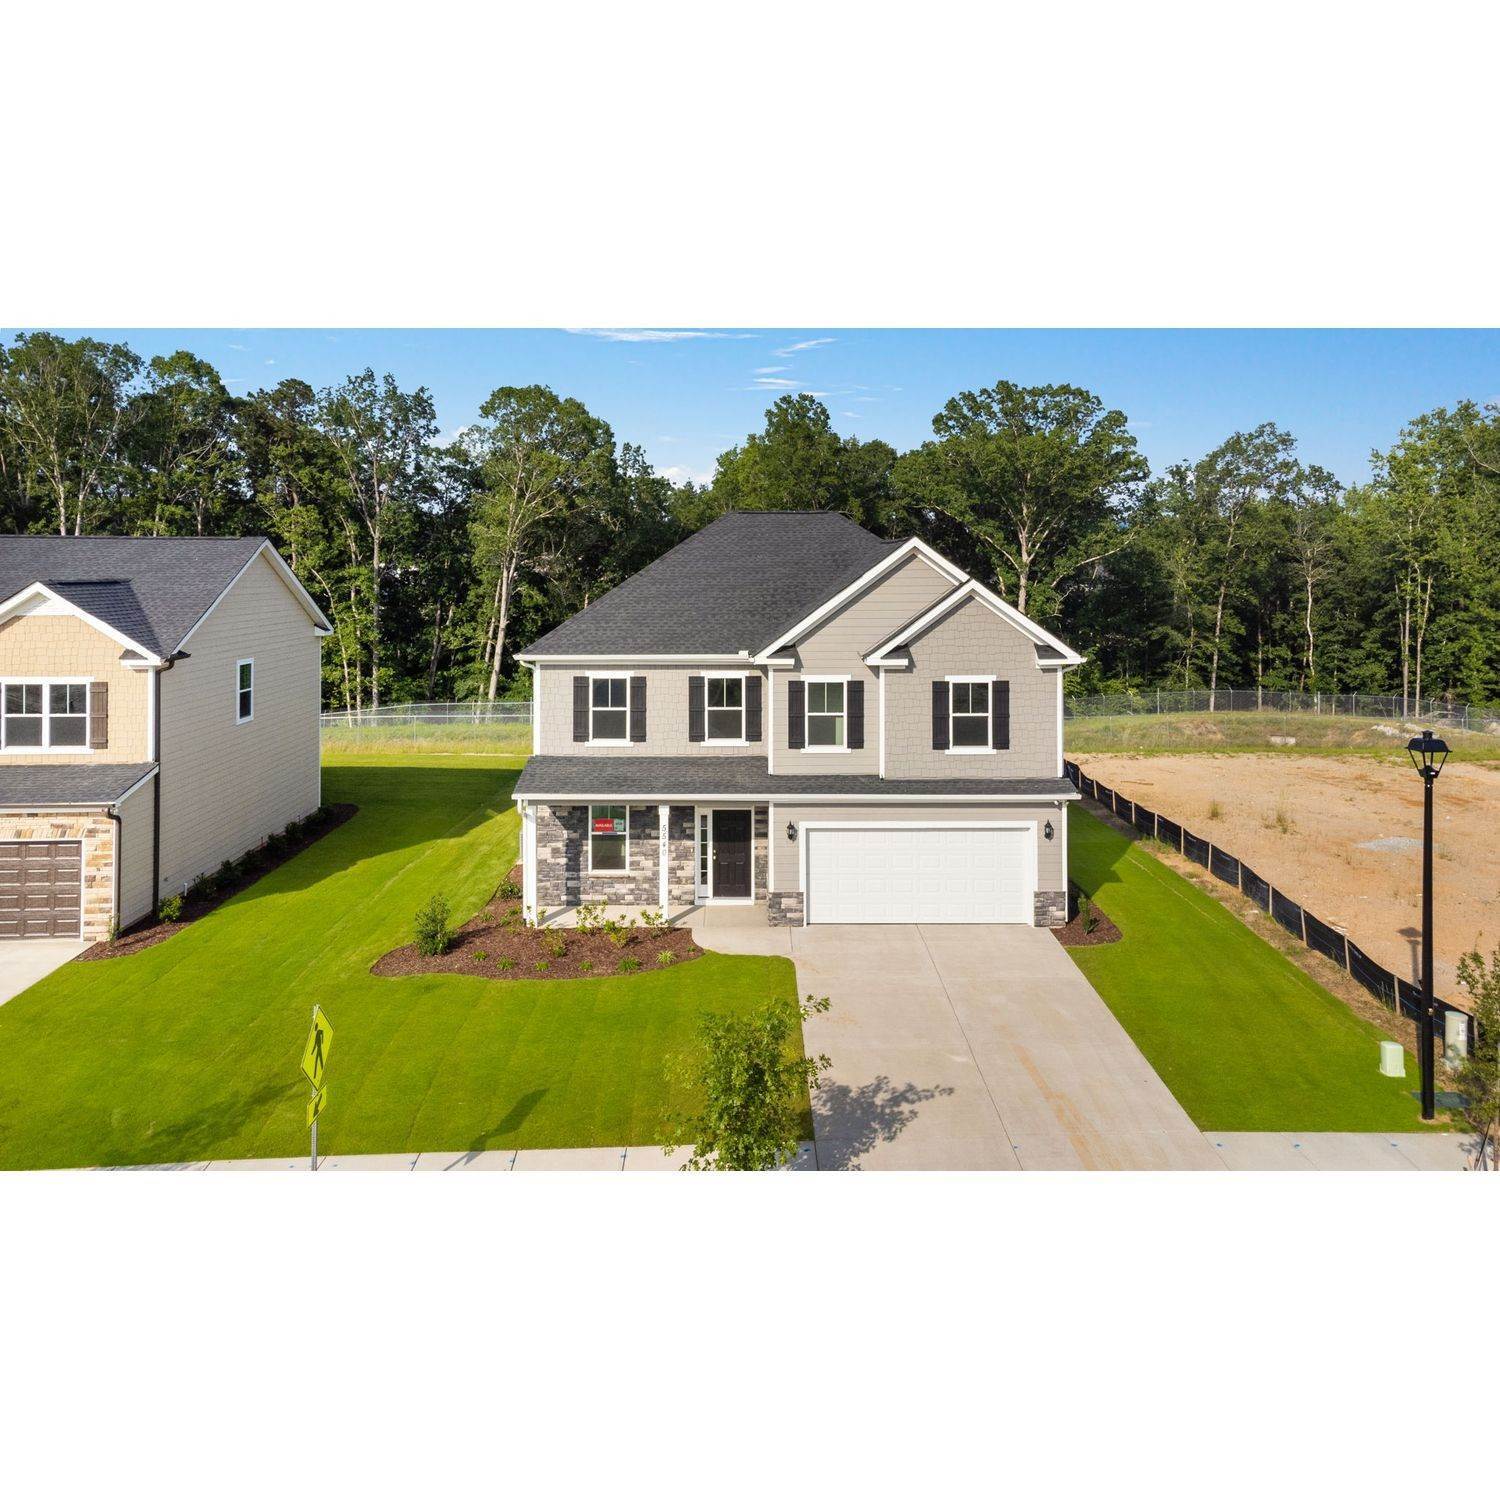 Tillery Park xây dựng tại 215 Prominence Drive, Grovetown, GA 30813